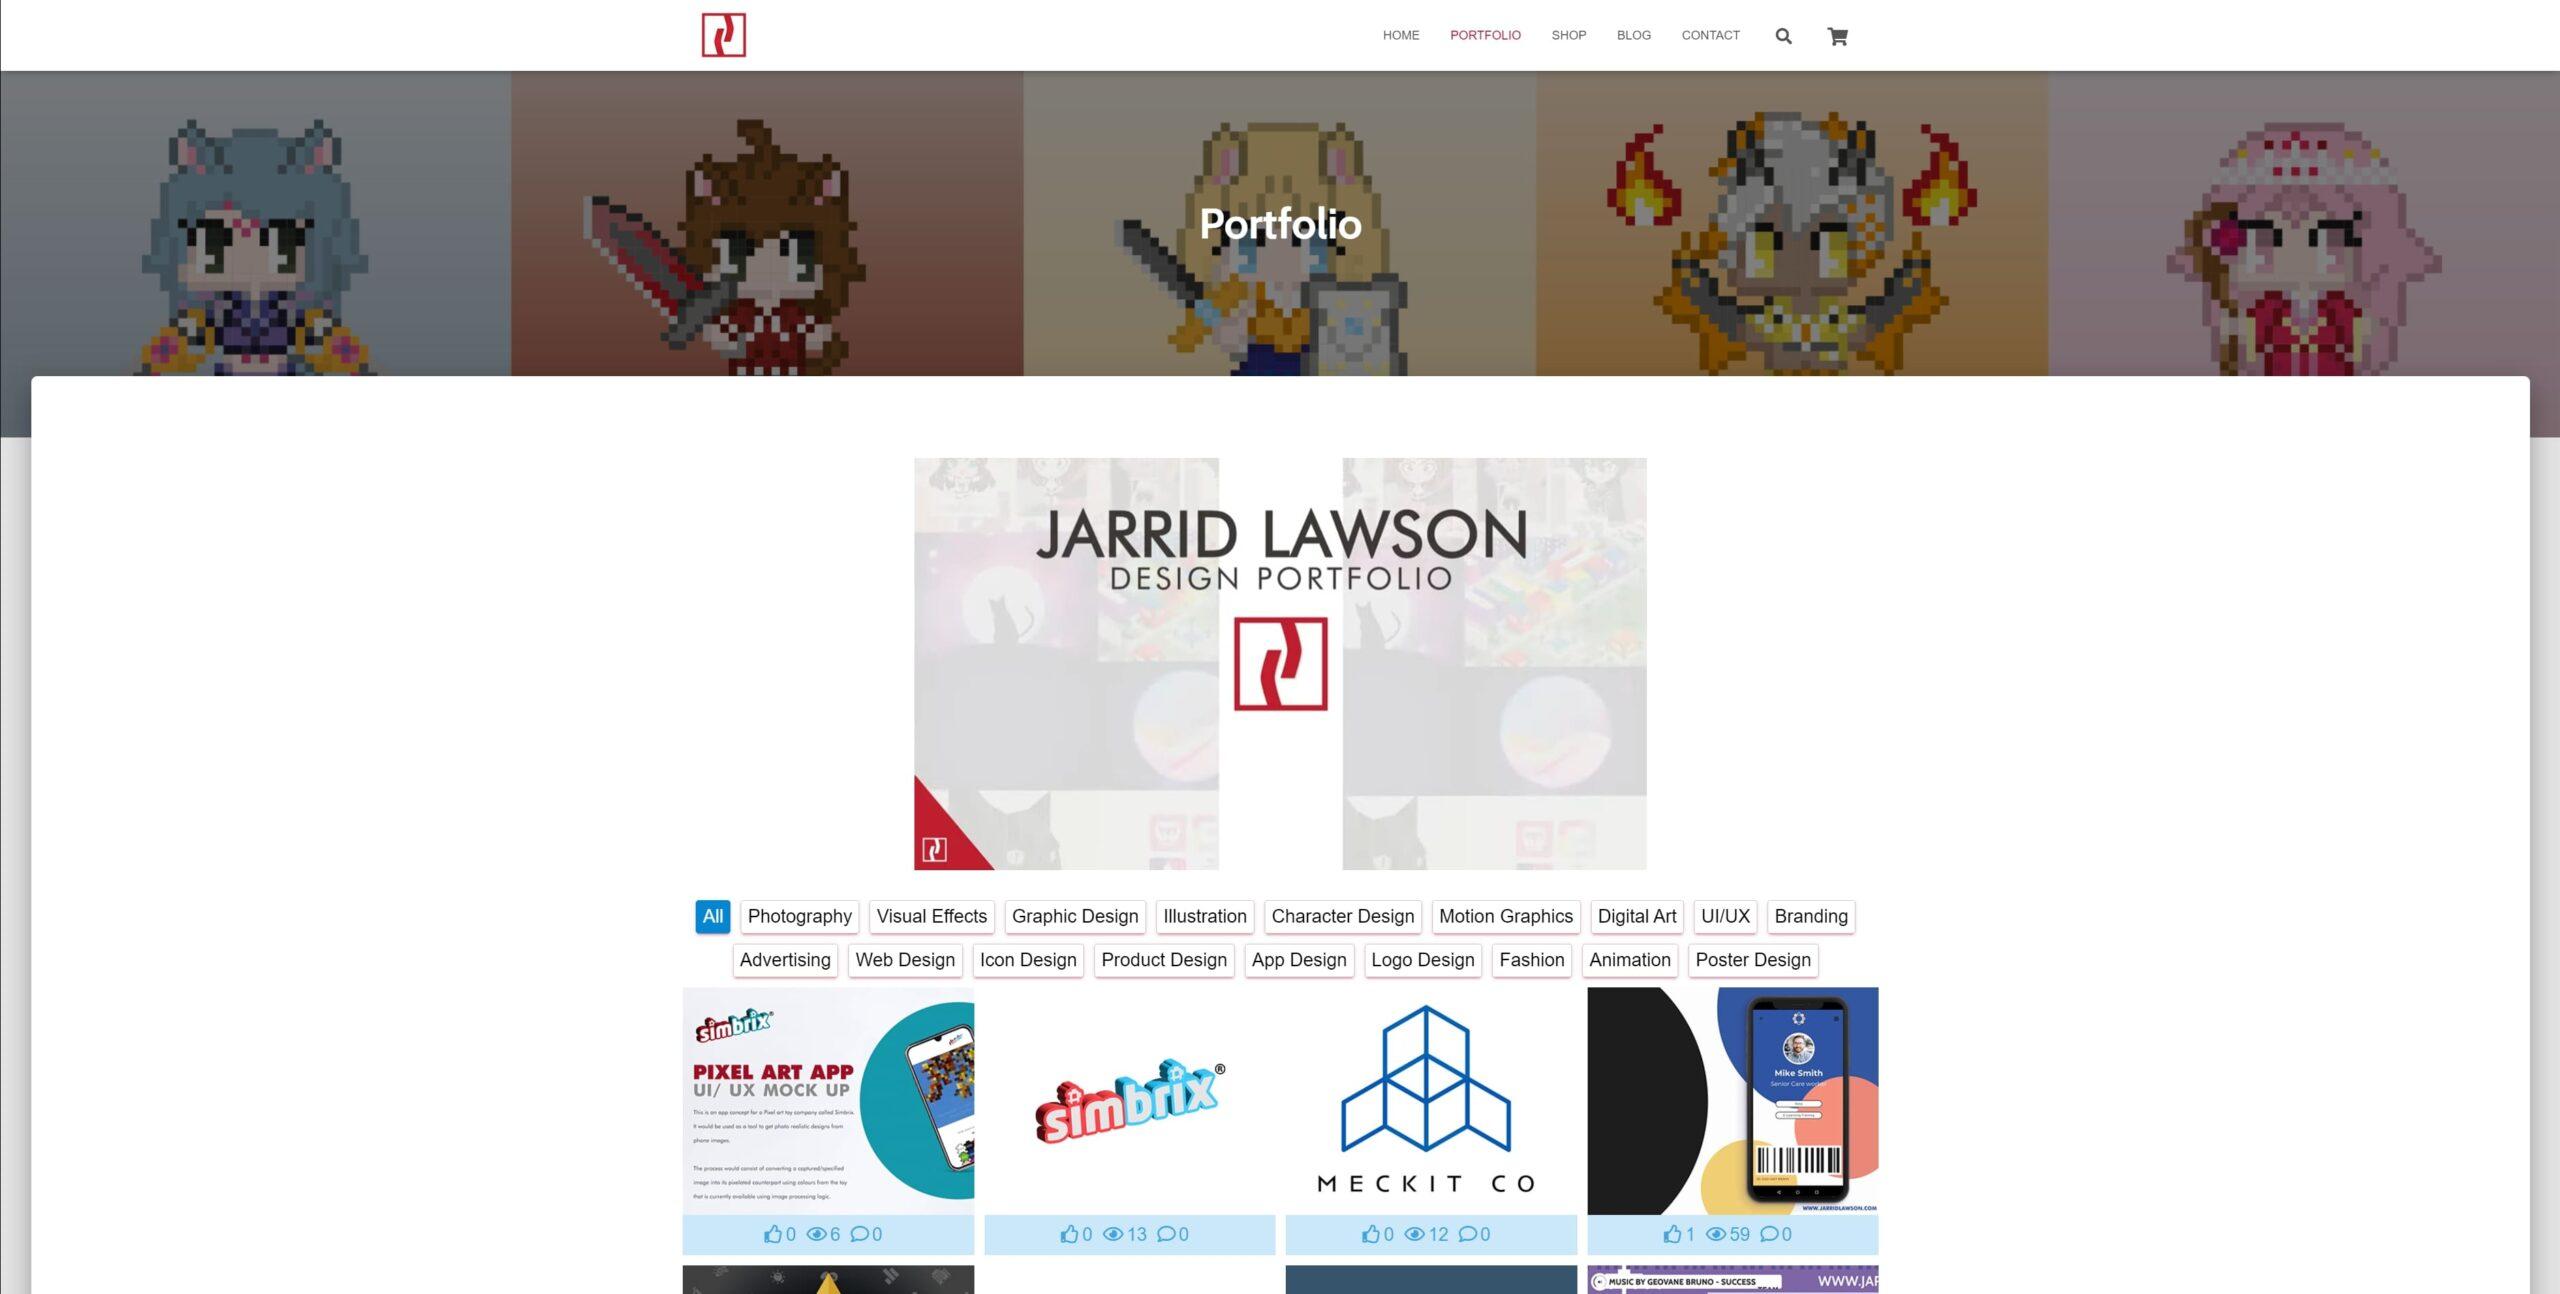 Site preview as an image for the Portfolio page